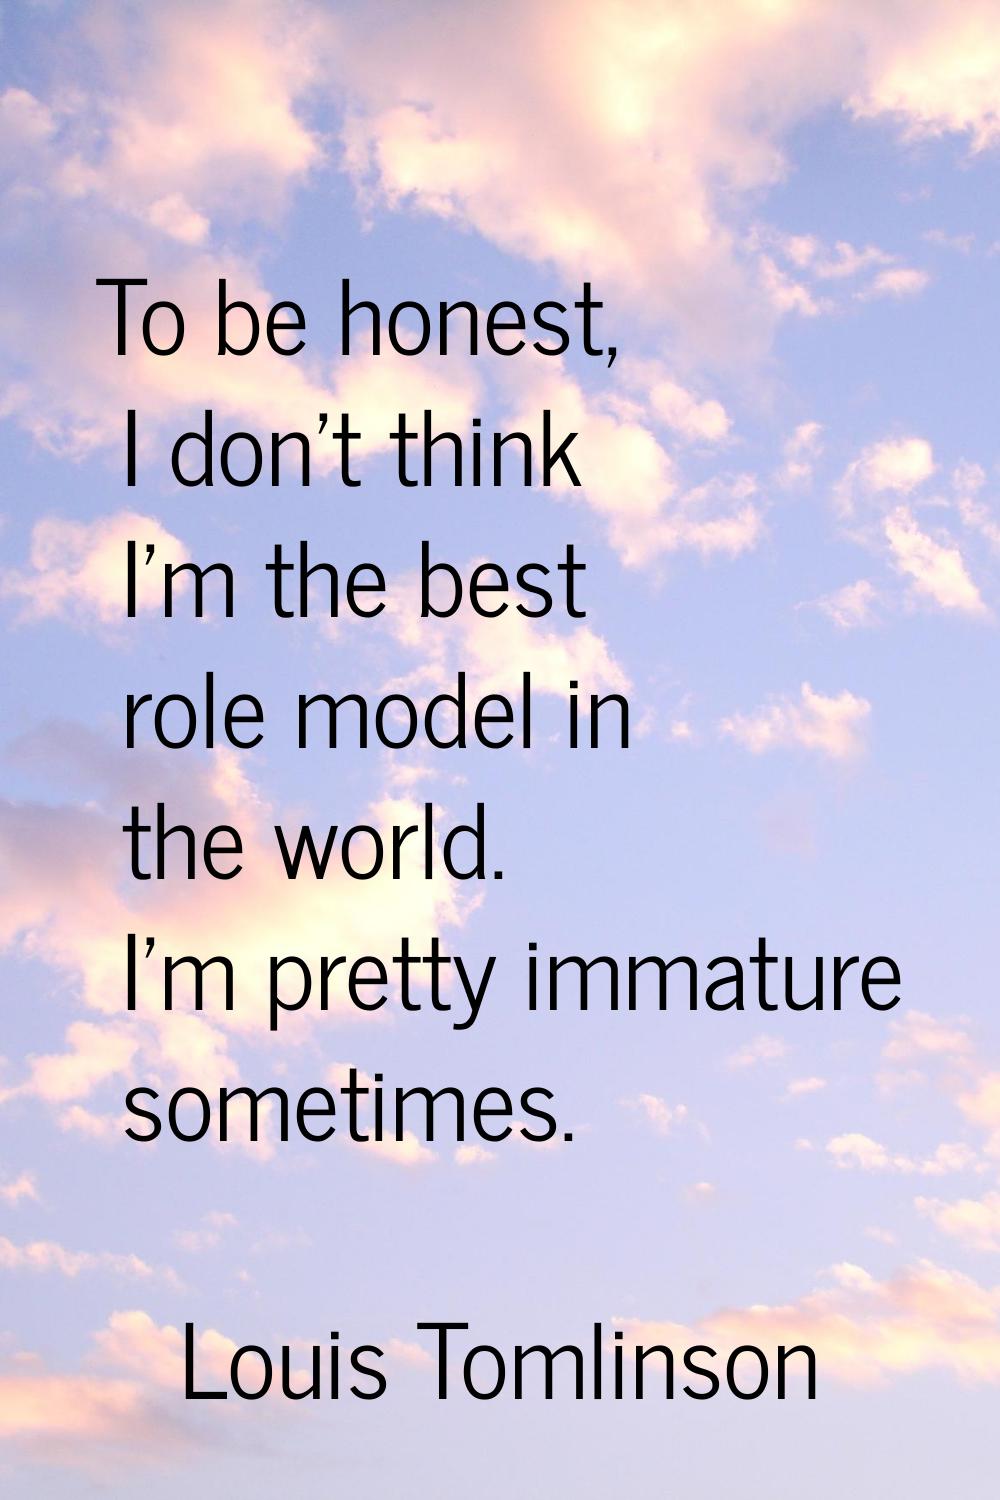 To be honest, I don't think I'm the best role model in the world. I'm pretty immature sometimes.